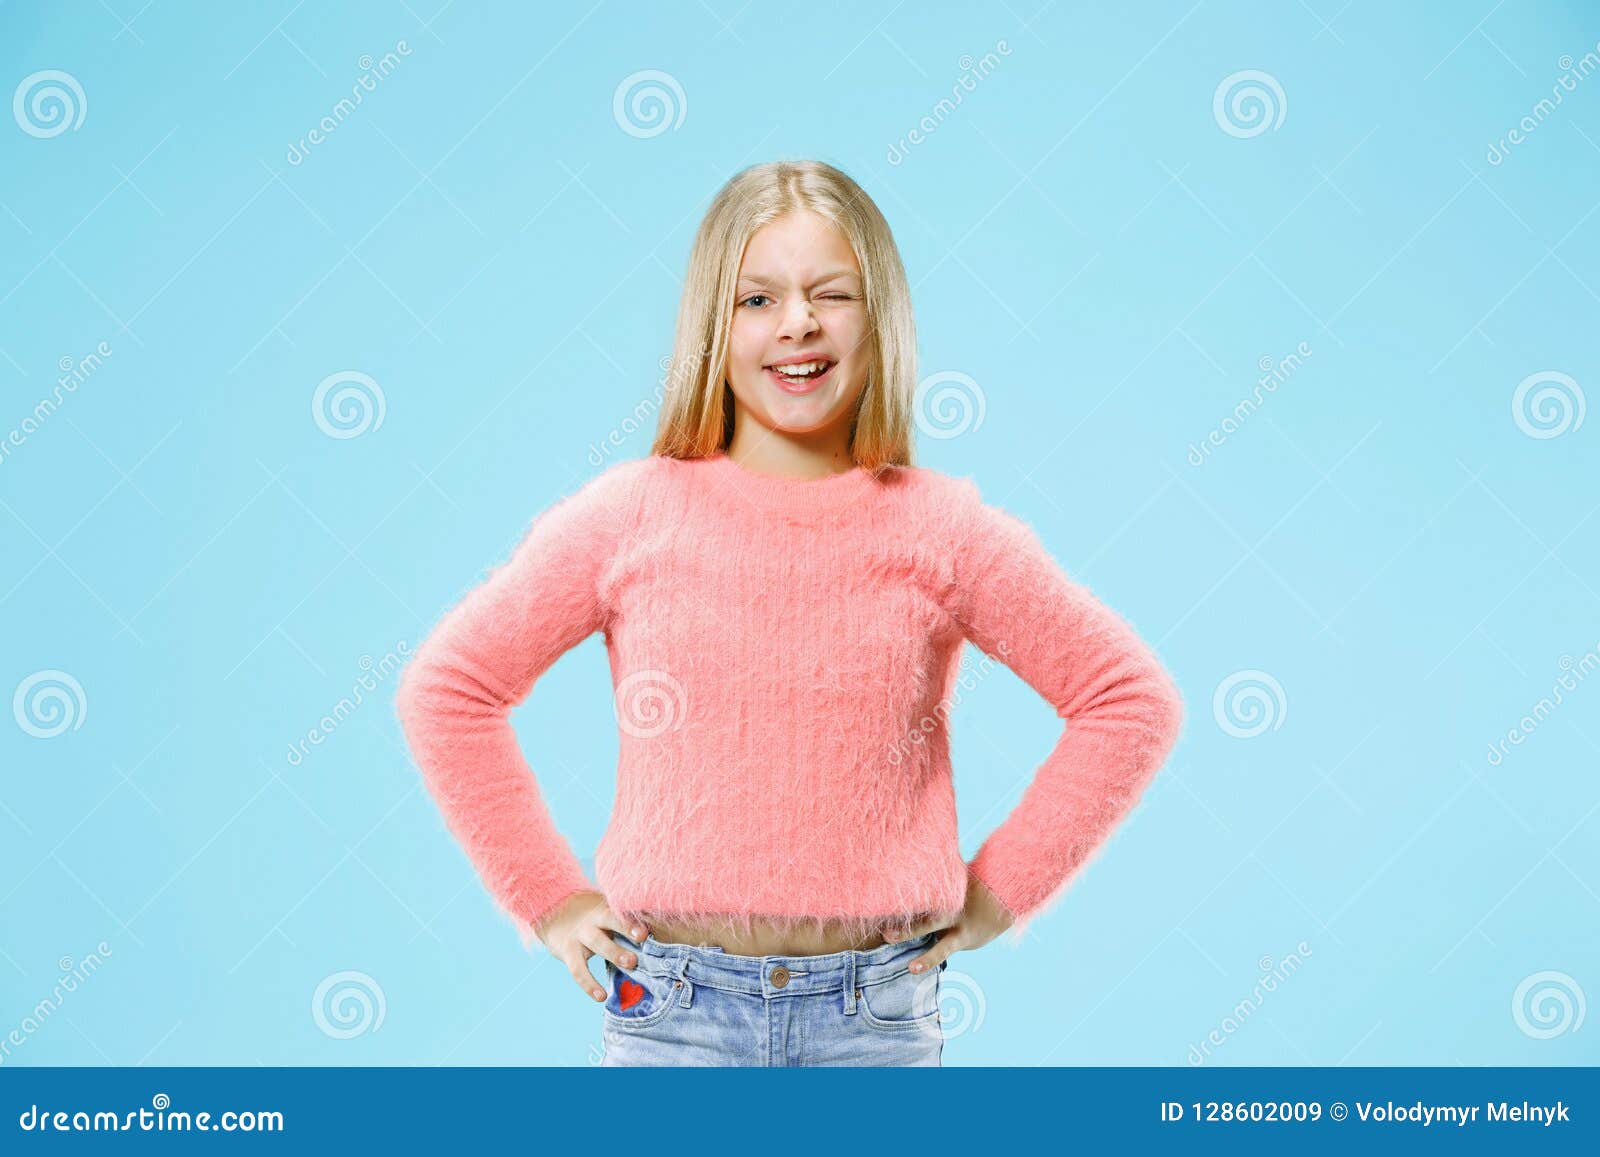 The Happy Teen Girl Standing And Smiling Against Orange 